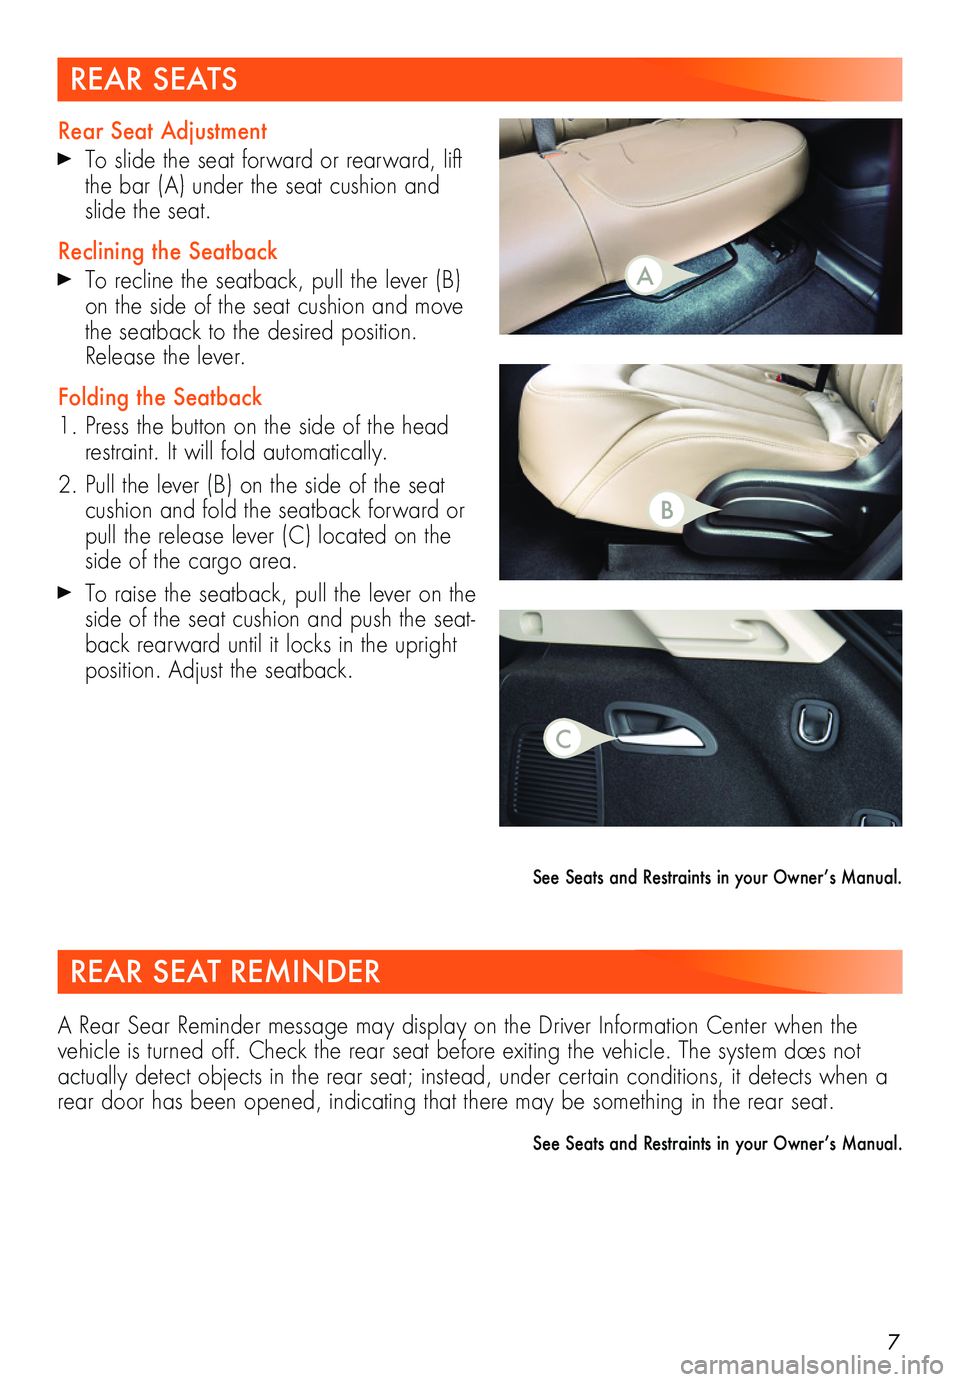 BUICK ENVISION 2019  Get To Know Guide 7
Rear Seat Adjustment
 To slide the seat forward or rearward, lift the bar (A) under the seat cushion and slide the seat.
Reclining the Seatback
 To recline the seatback, pull the lever (B) on the s